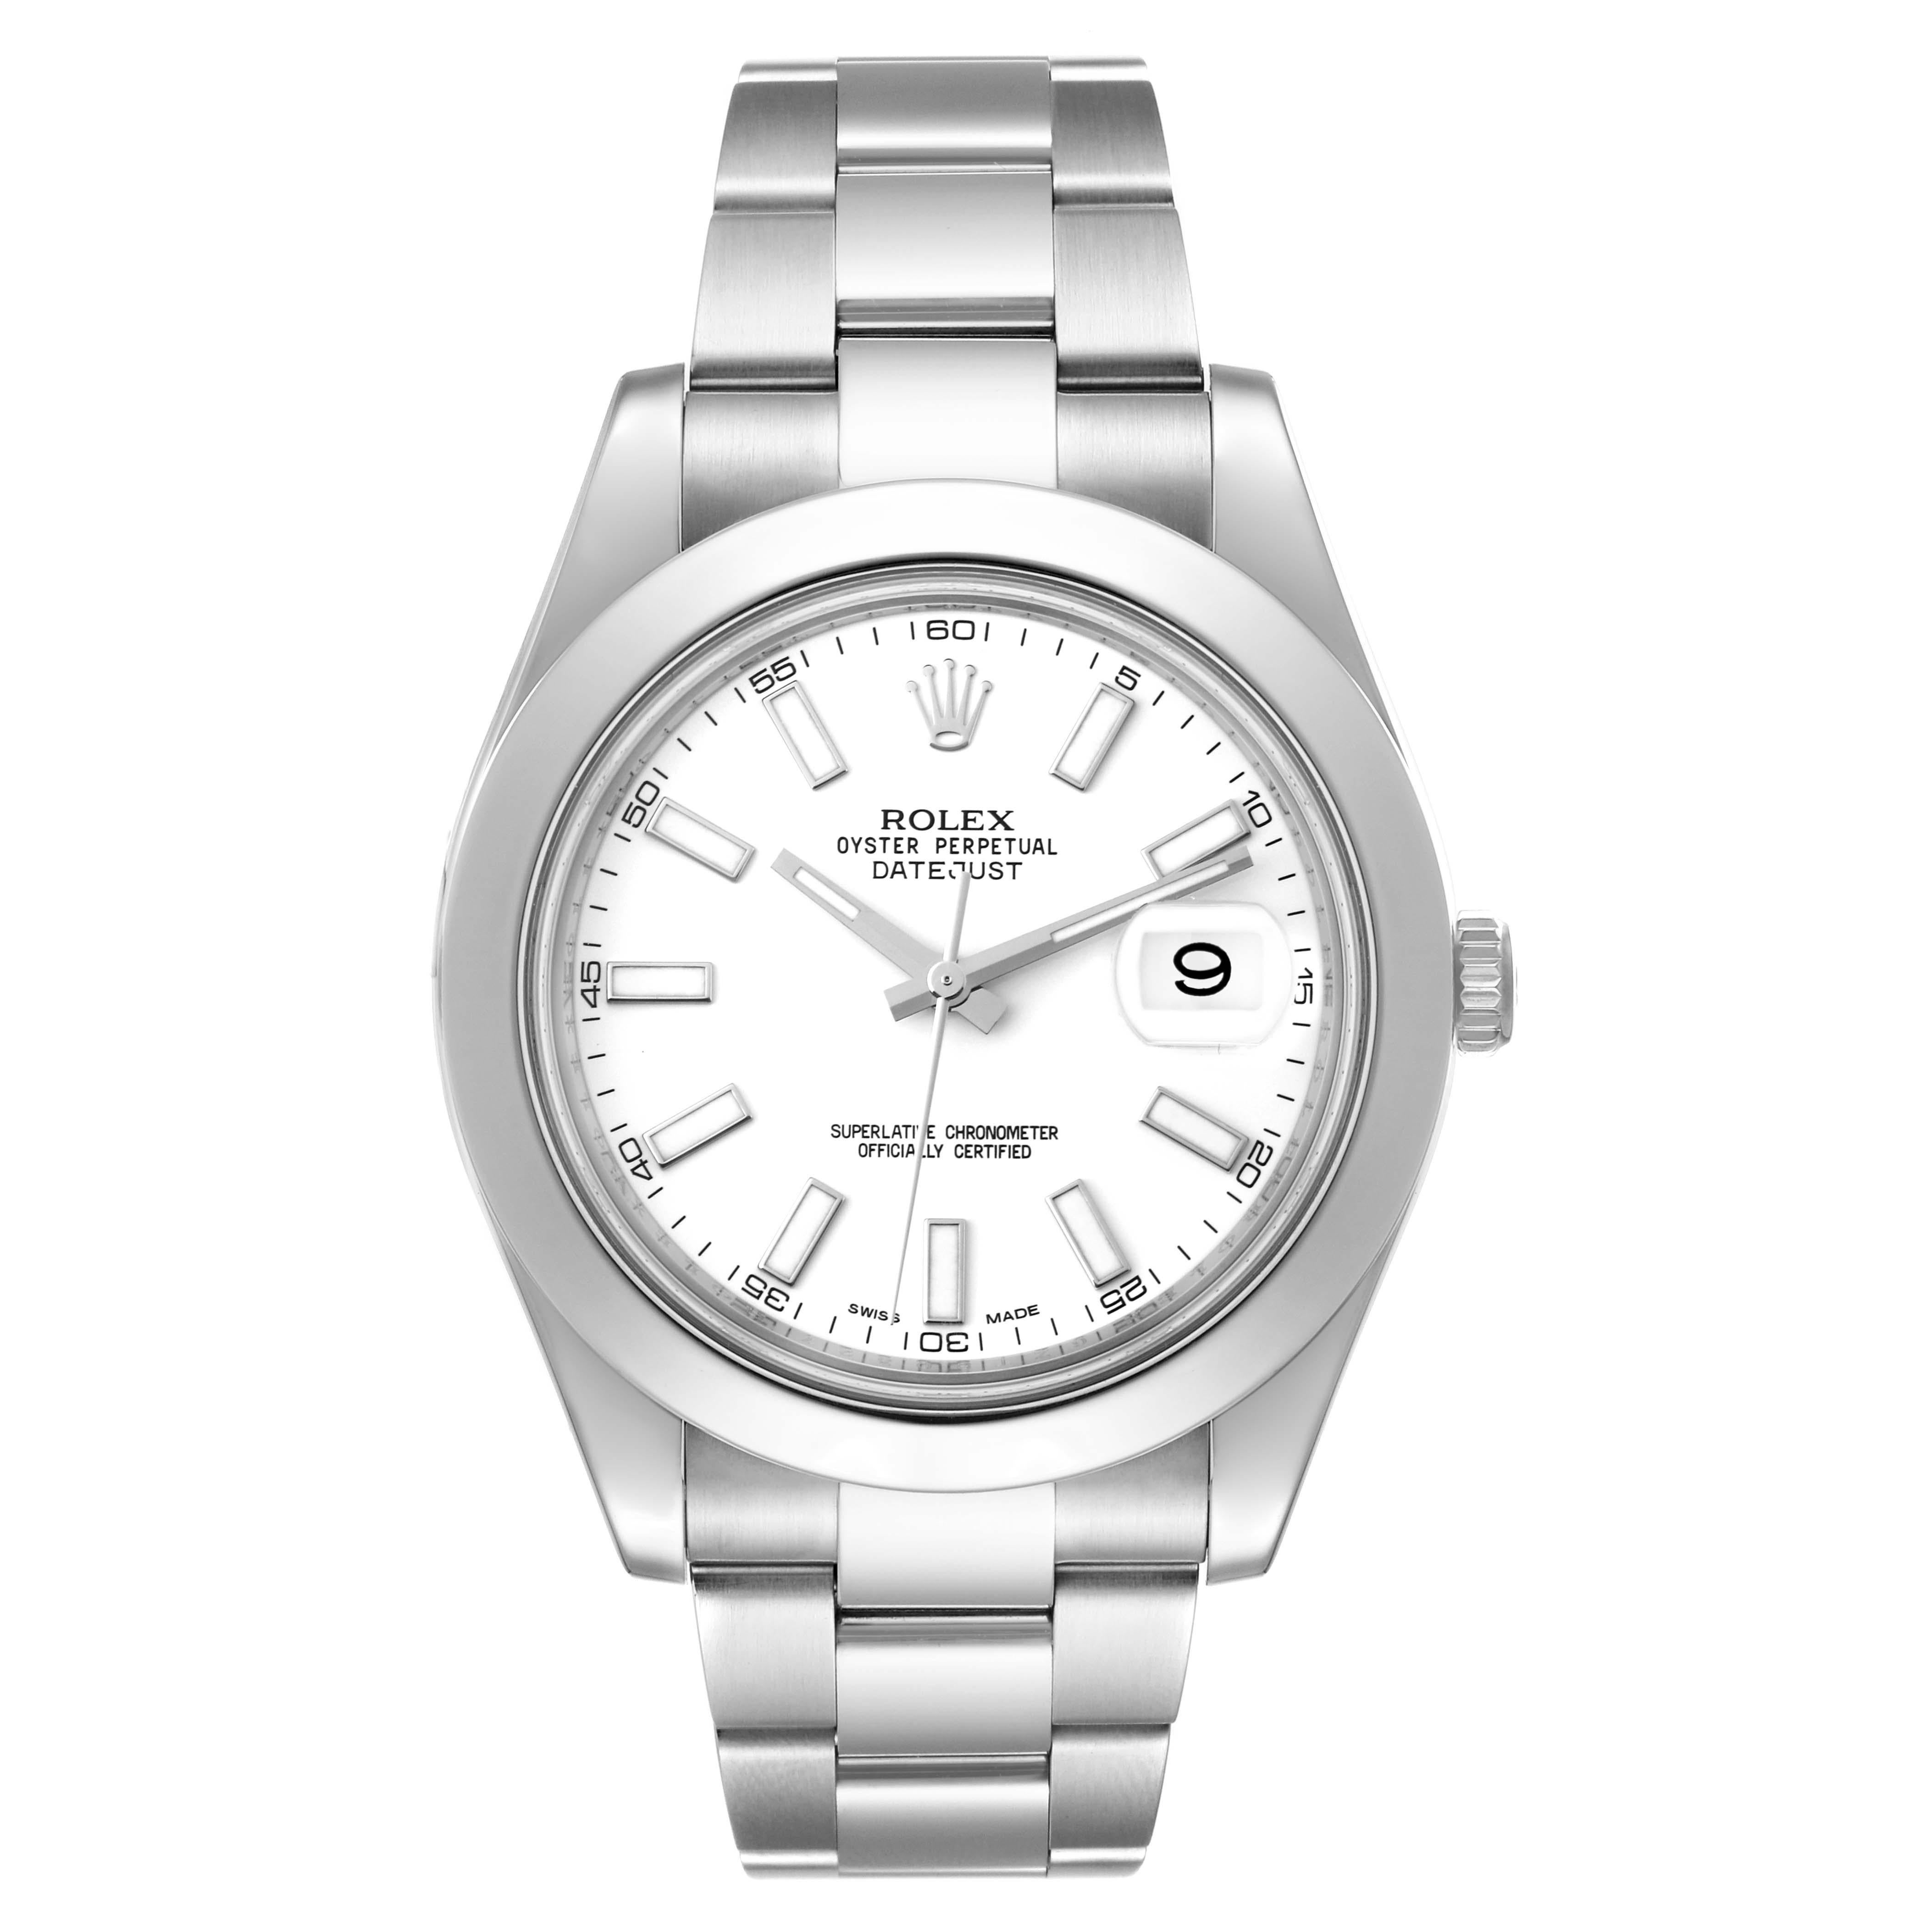 Rolex Datejust II White Dial Oyster Bracelet Steel Mens Watch 116300. Officially certified chronometer automatic self-winding movement with quickset date. Stainless steel case 41.0 mm in diameter. High polished lugs. Rolex logo on a crown. Stainless